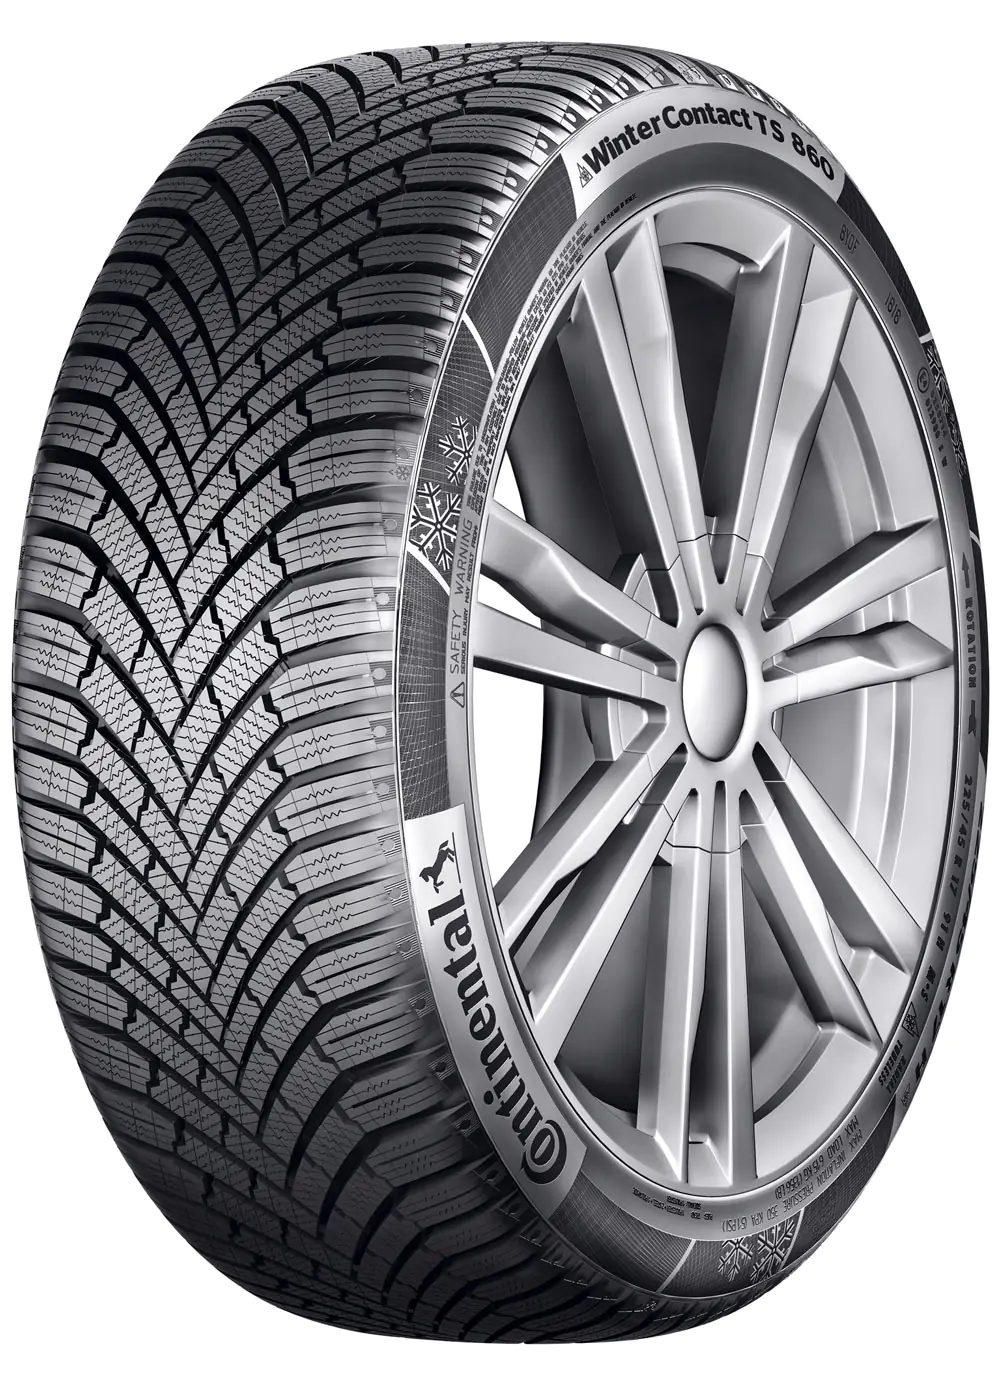 Gomme Autovettura Continental 295/35 R20 105V WinterContact TS860 S XL M+S Invernale